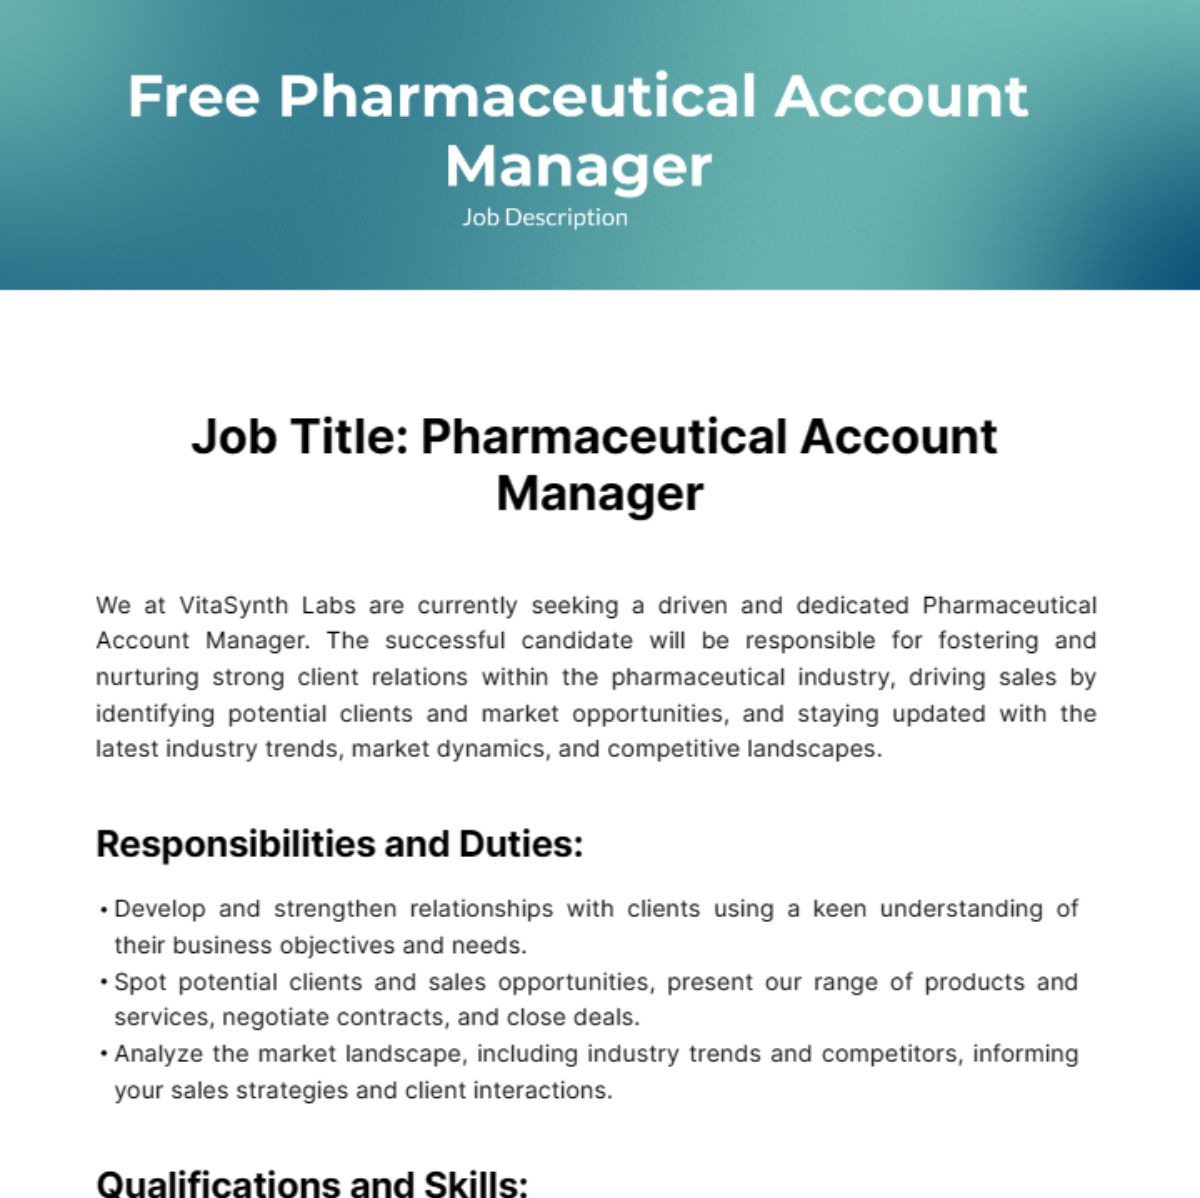 Free Pharmaceutical Account Manager Job Description Template